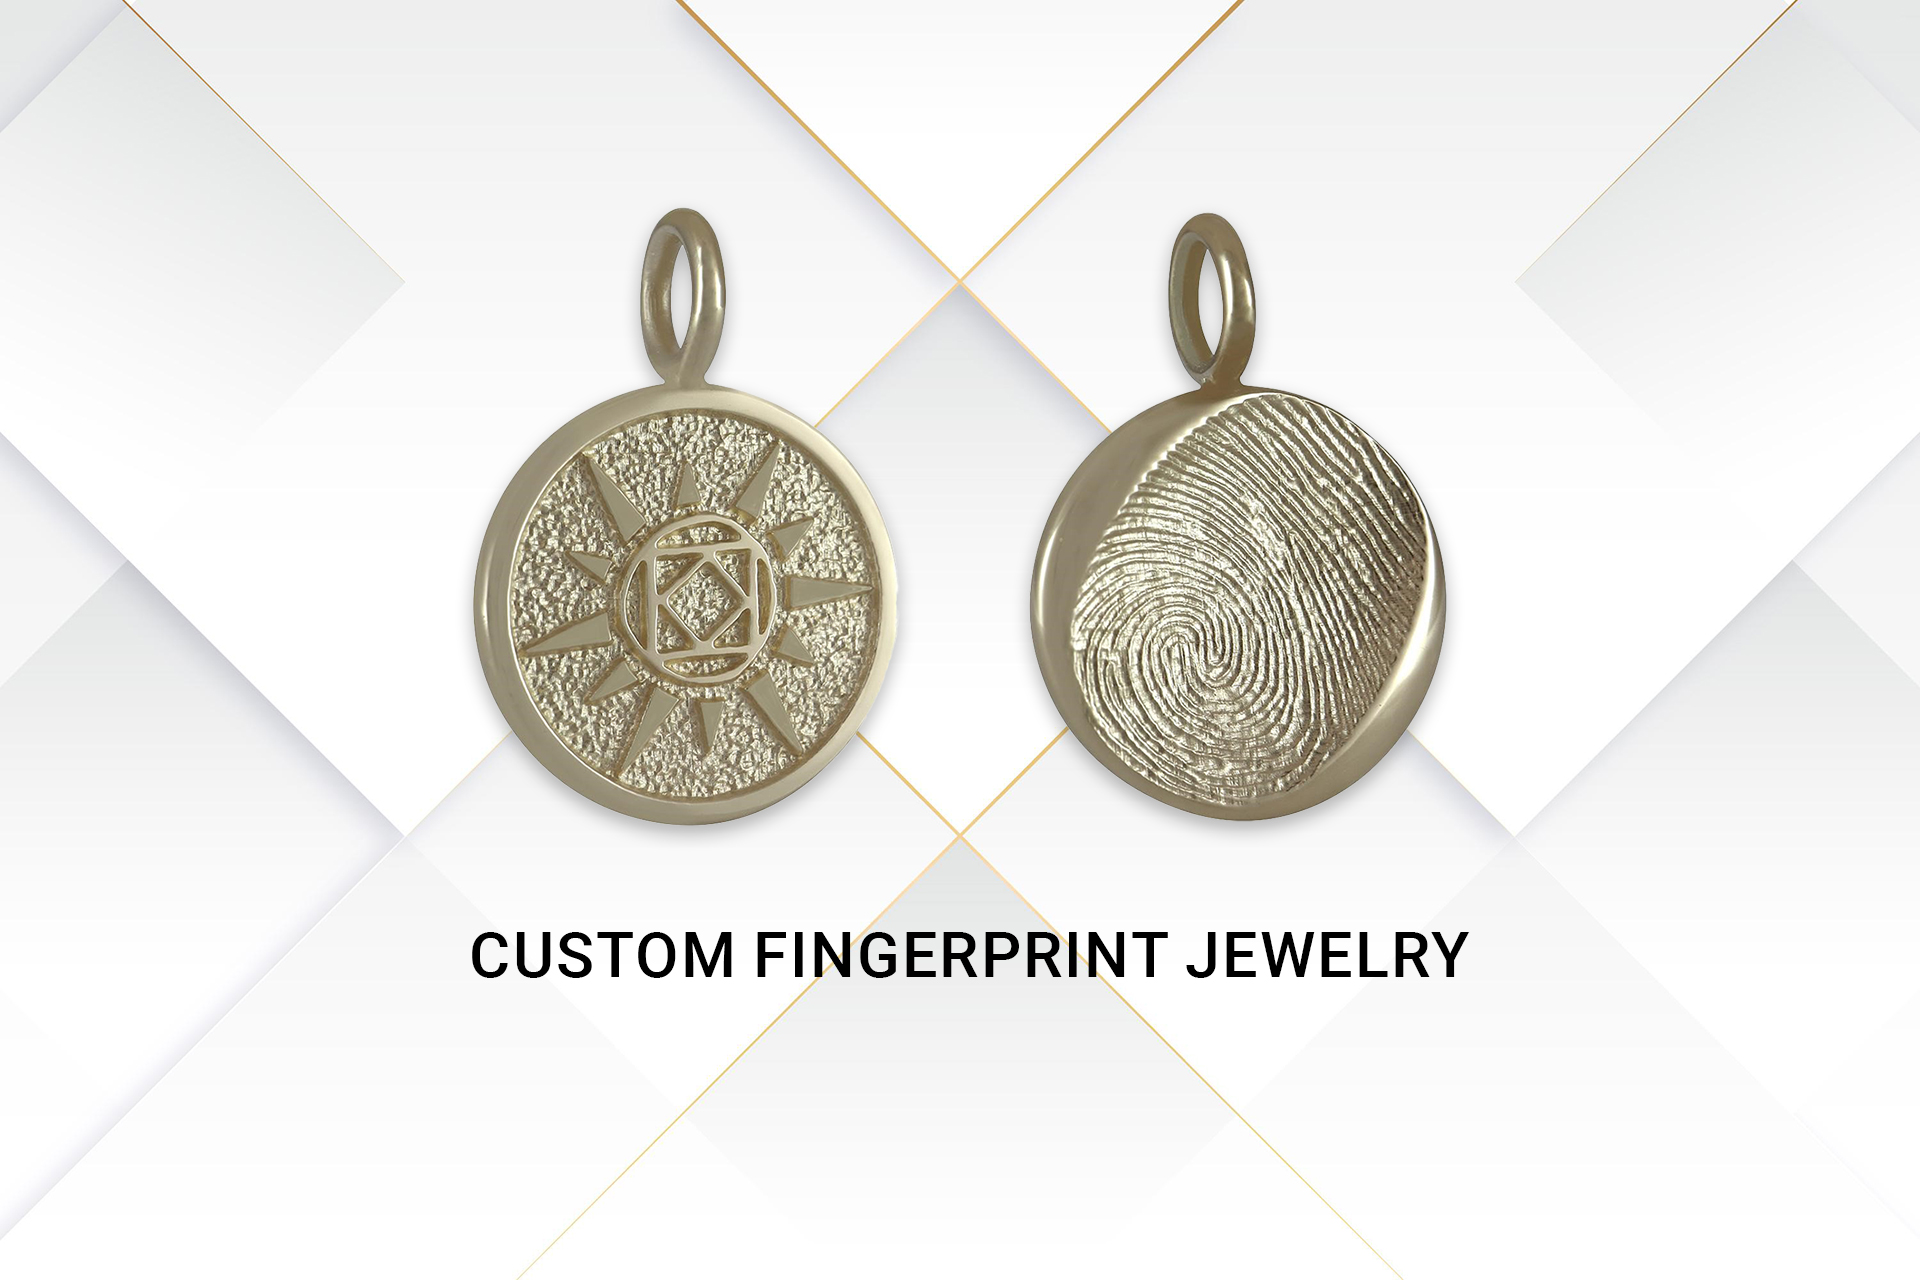 Celebrating Family with Custom Fingerprint Jewelry - A Brother Honored